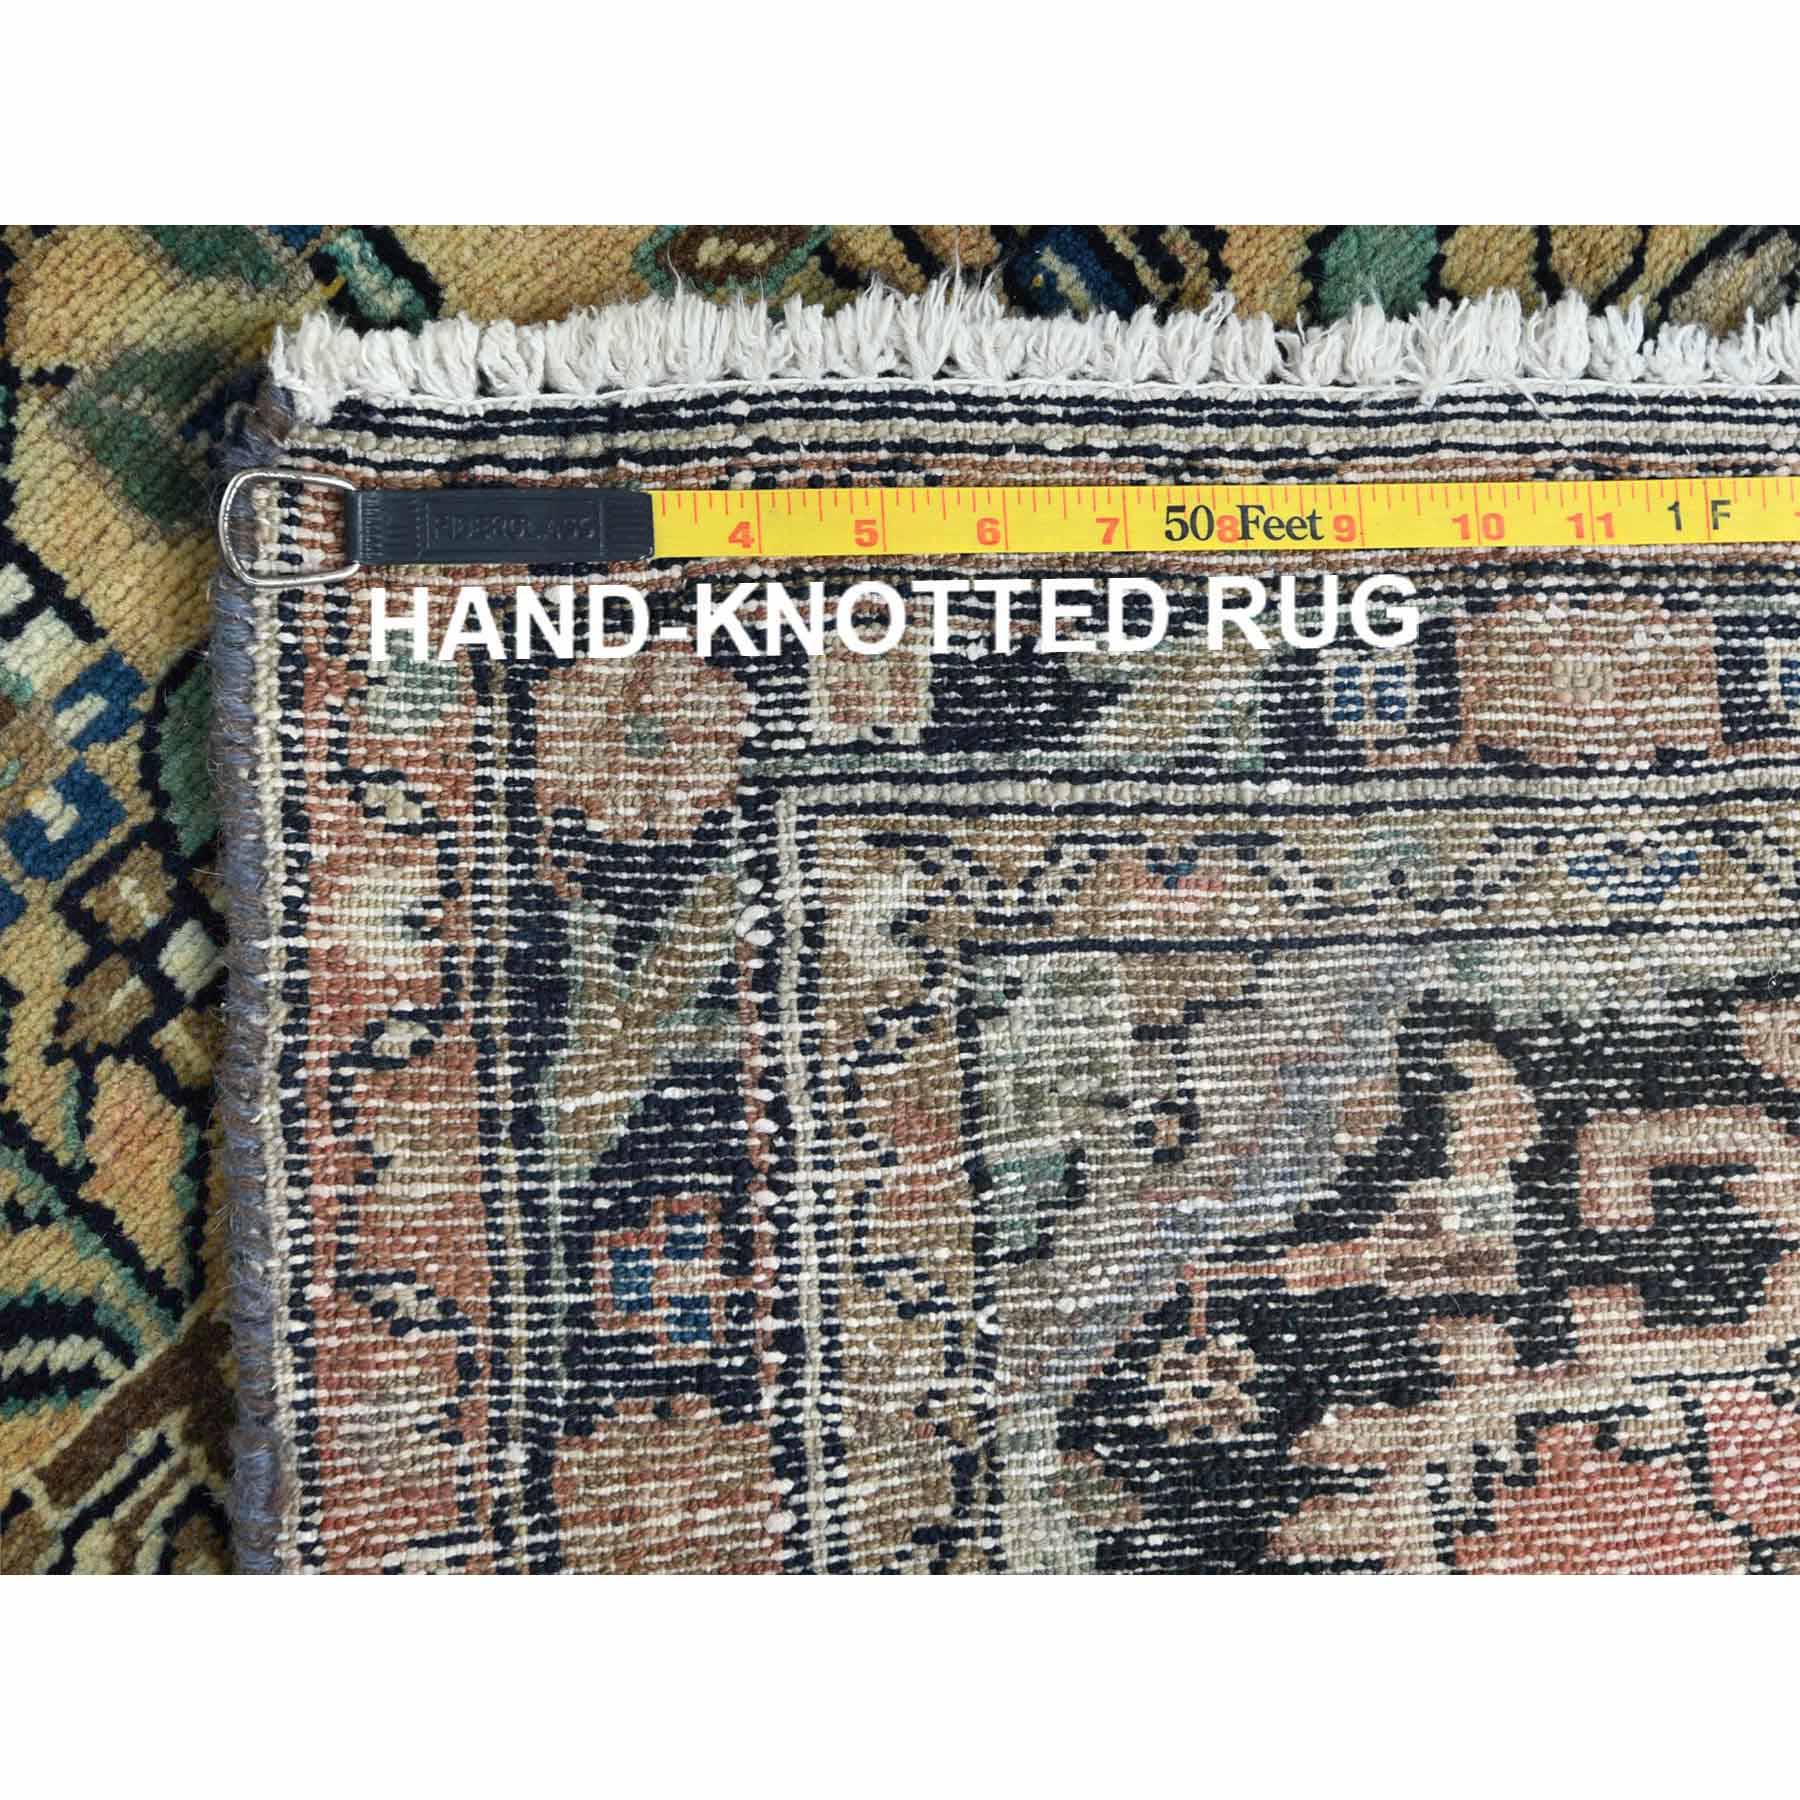 Overdyed-Vintage-Hand-Knotted-Rug-309720